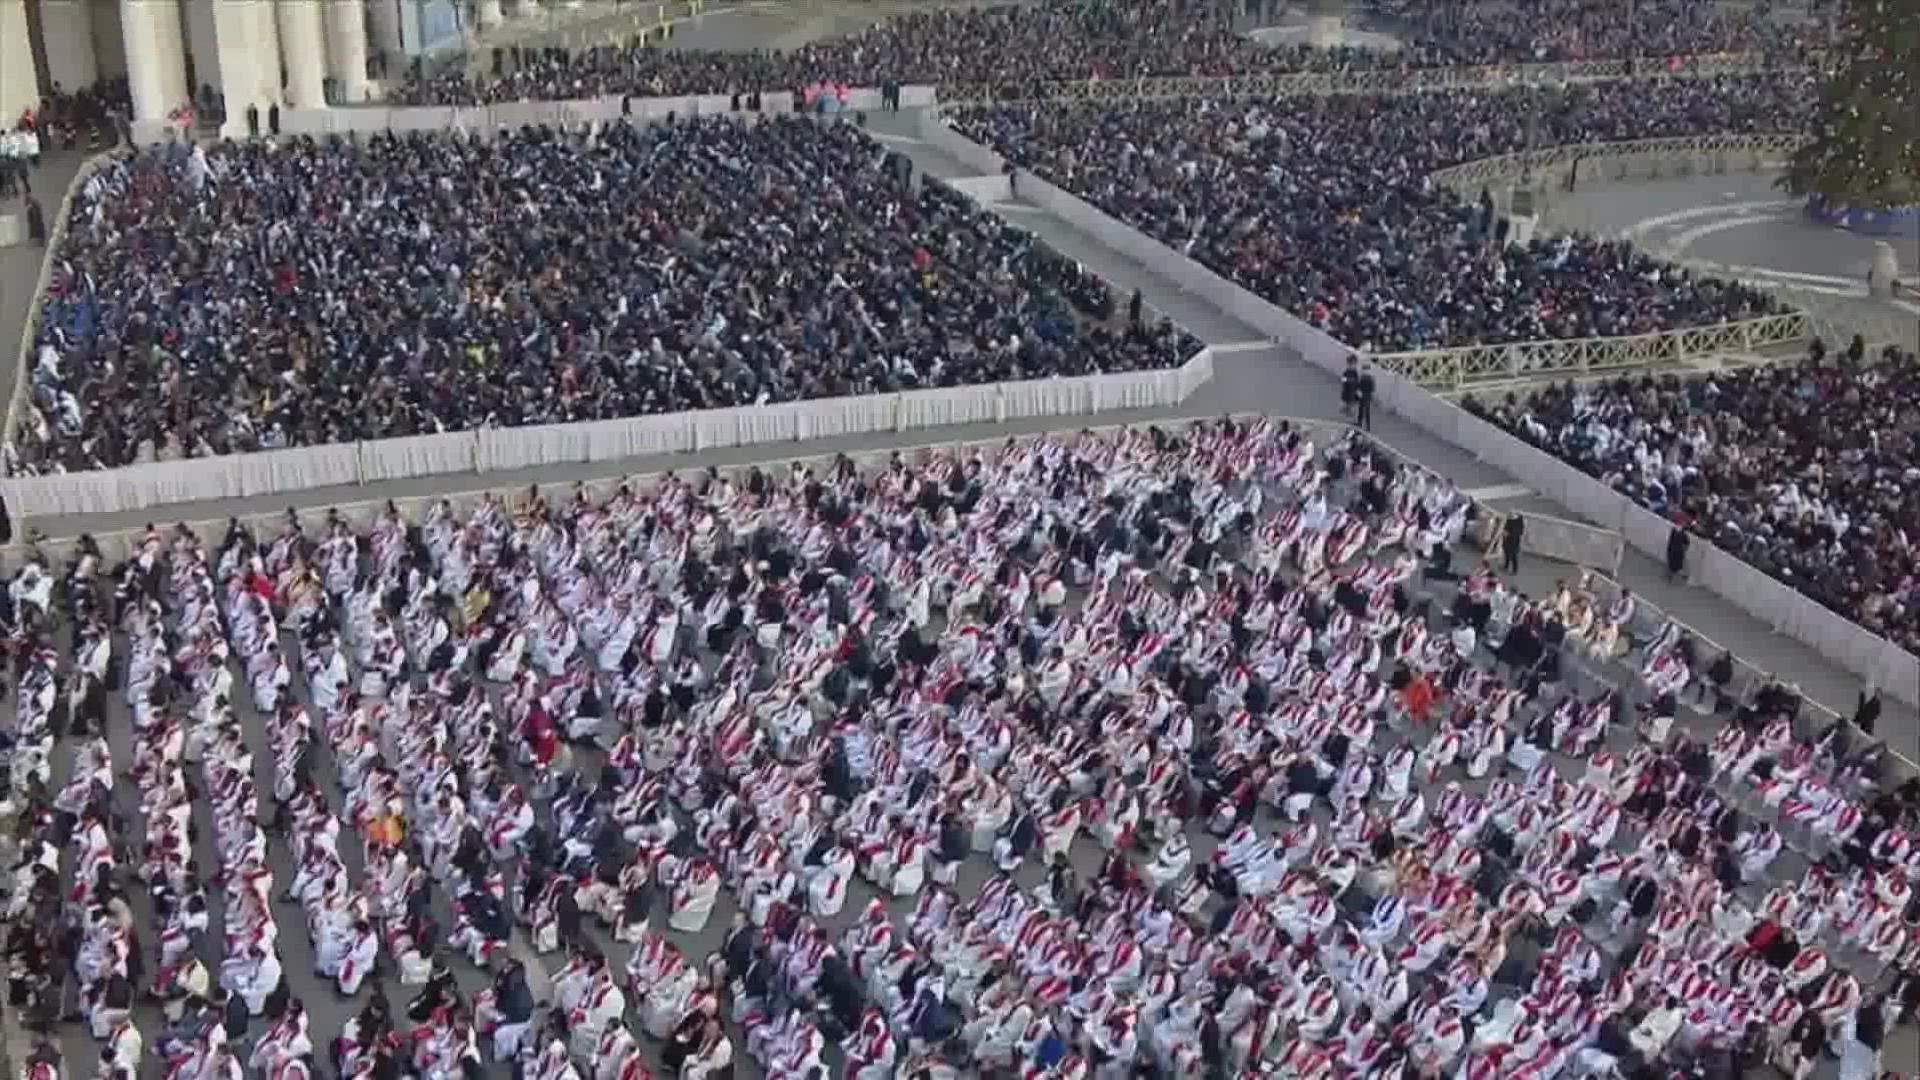 Mourners poured into St. Peter's Square, hoping to pay final respects to the pope who made history by retiring.